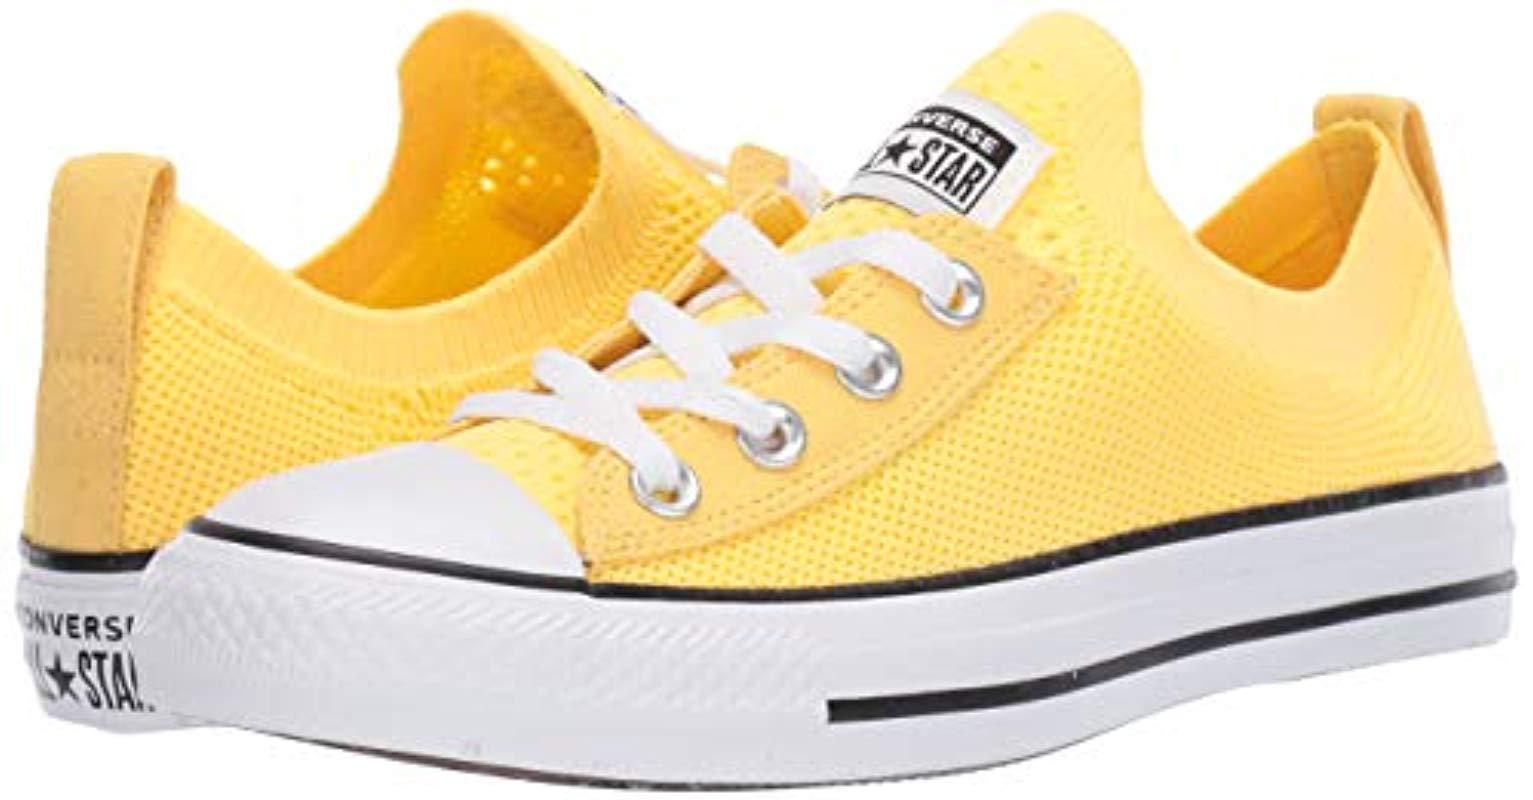 Converse Chuck Taylor Shoreline Knit Slip On Sneakers in Yellow | Lyst